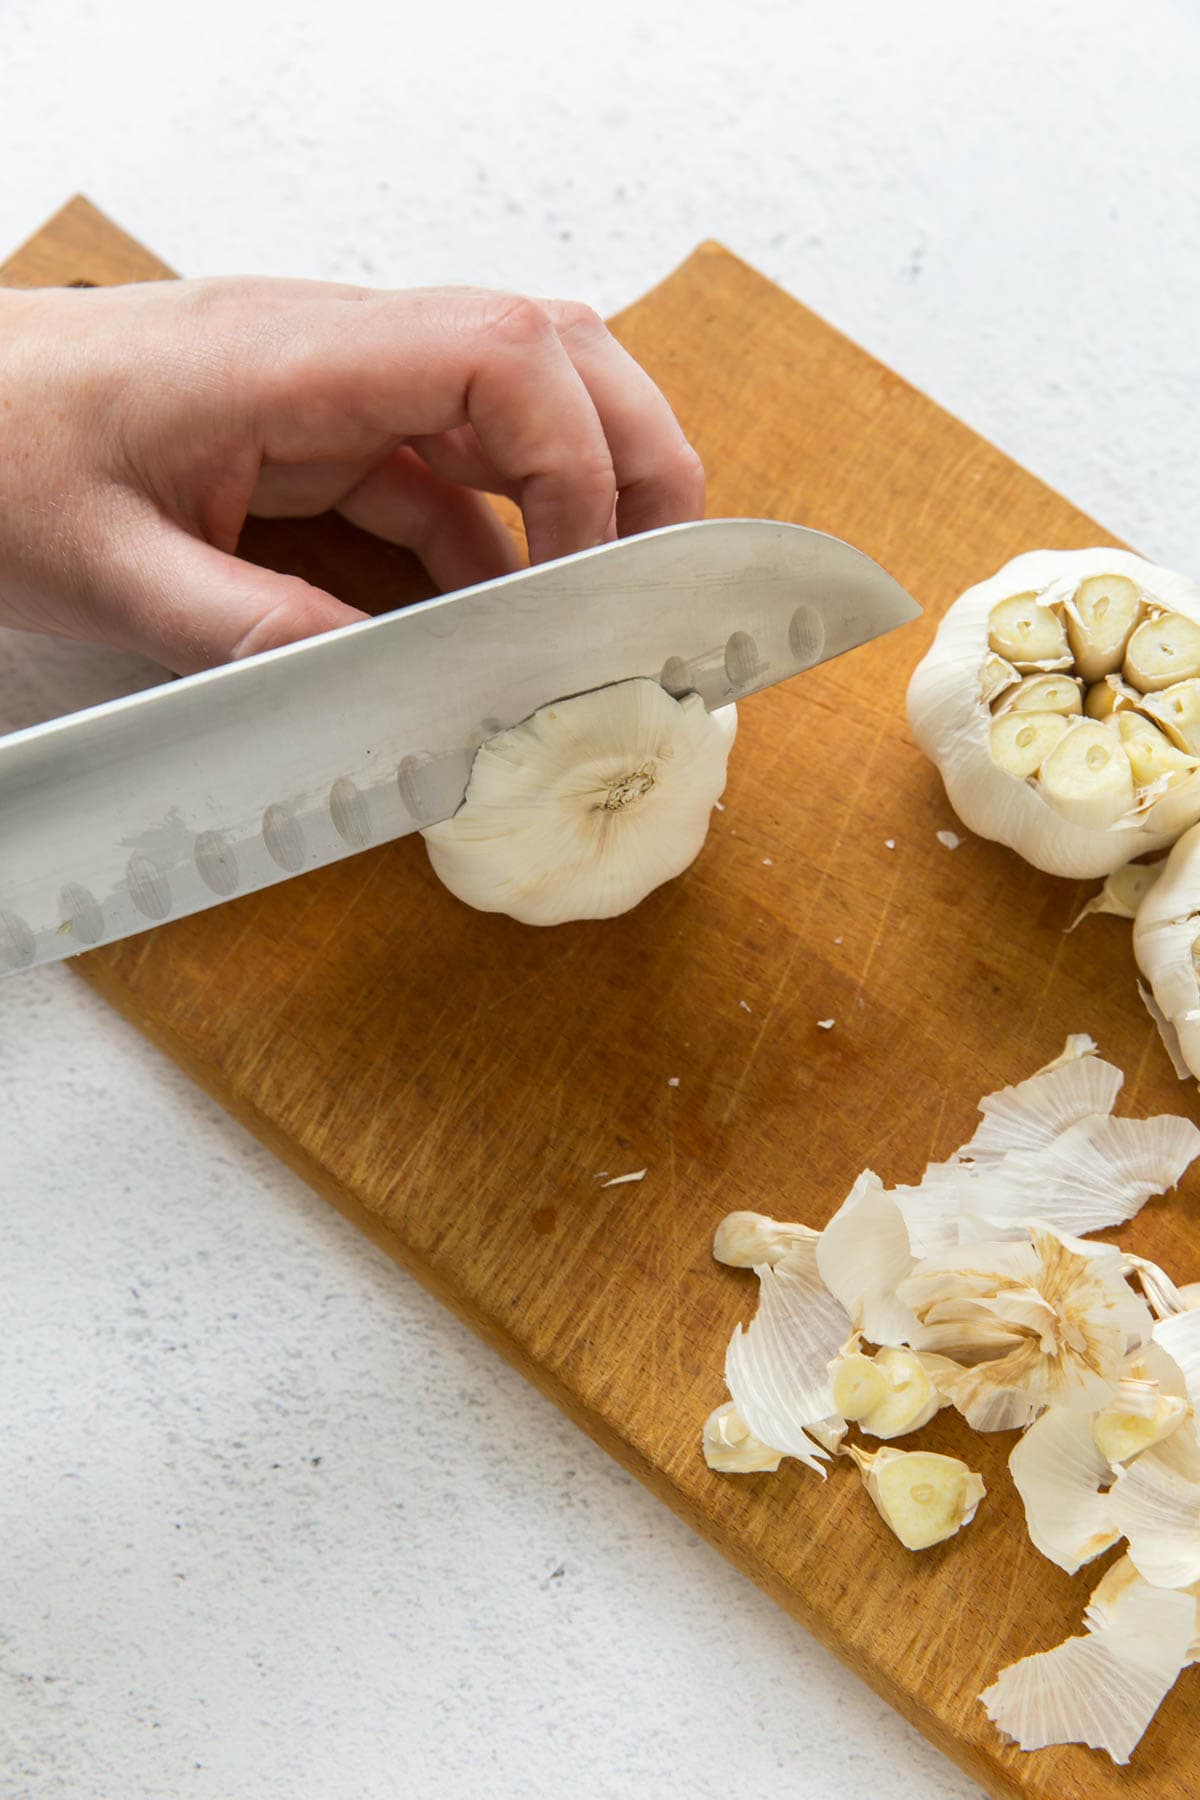 A wood cutting board, head of garlic, and a hand holding the bulb and a knife slicing one end of the garlic off.